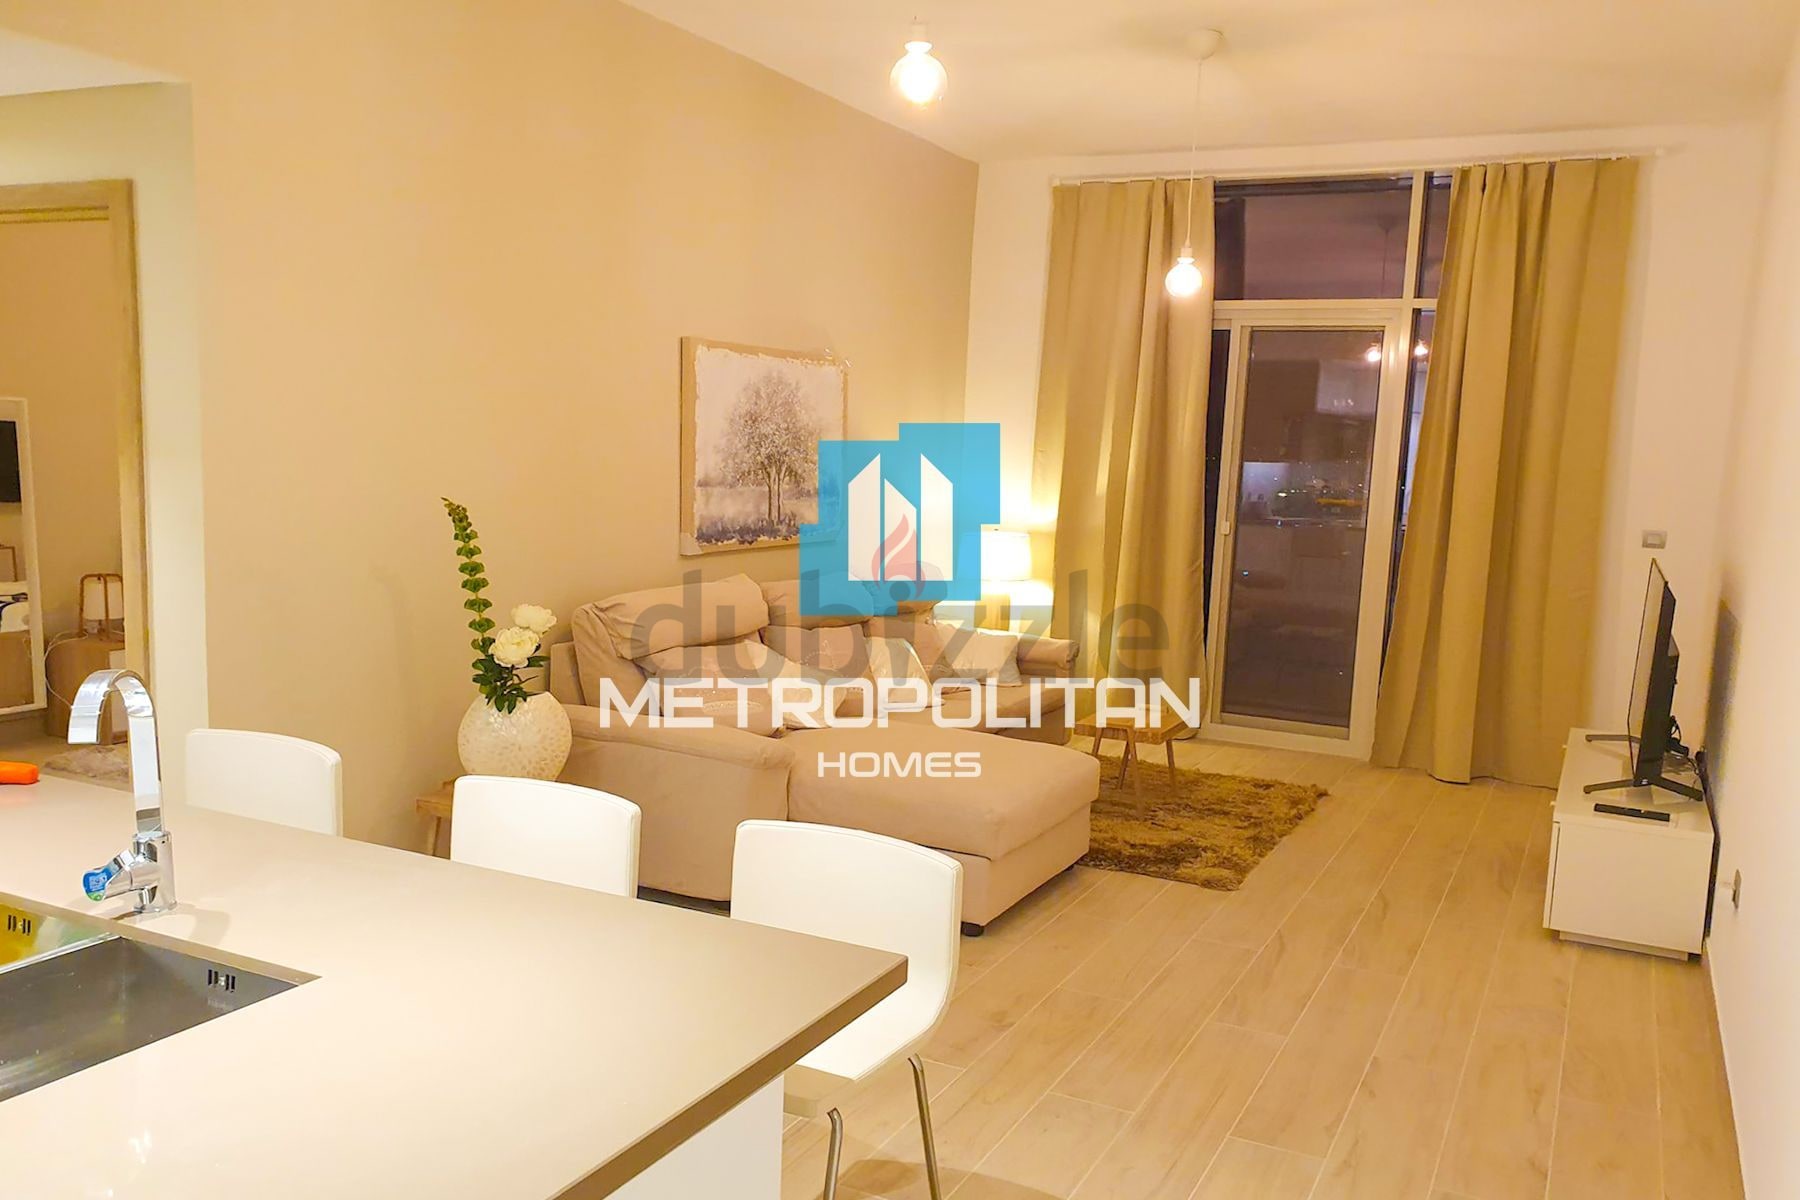 Rented | Furnished 1br | Well Maintained